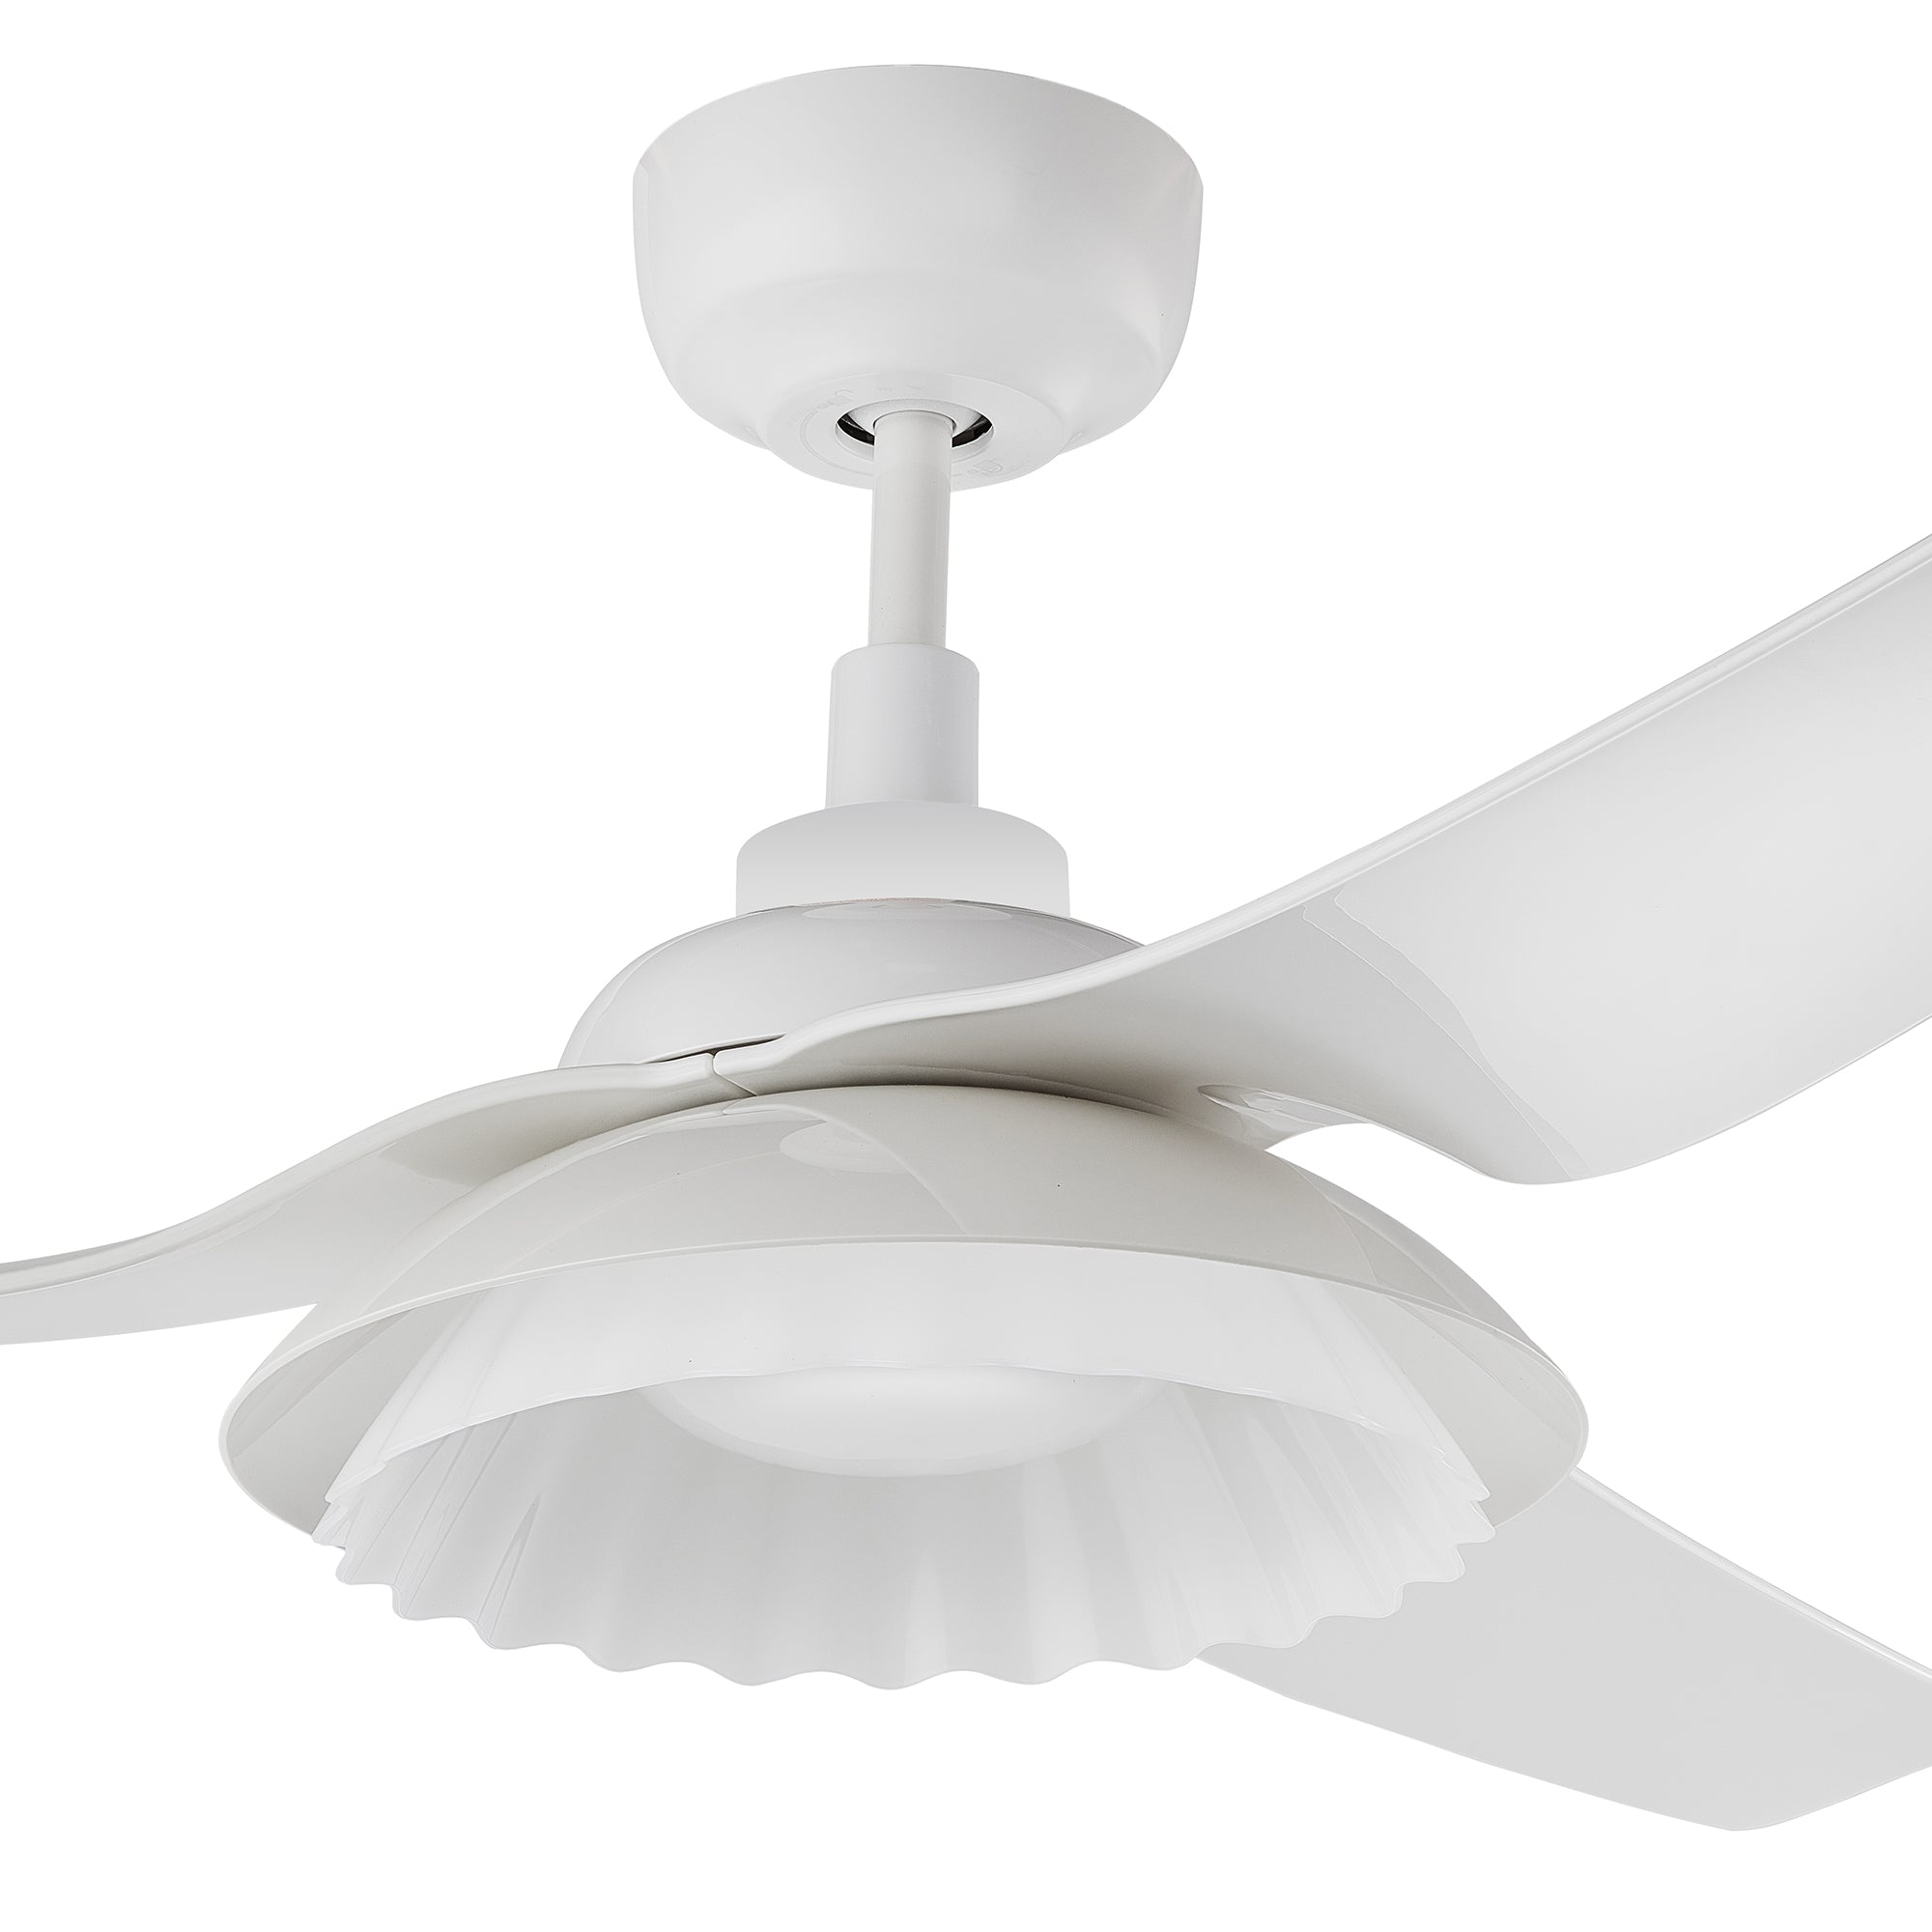 The  Smafan Daisy  52'' smart ceiling fan keeps your space cool, bright, and stylish. It is a soft modern masterpiece perfect for your large indoor living spaces. This Wifi smart ceiling fan is a simplicity designing with White finish, use very strong ABS blades and has an integrated 4000K LED daylight. 